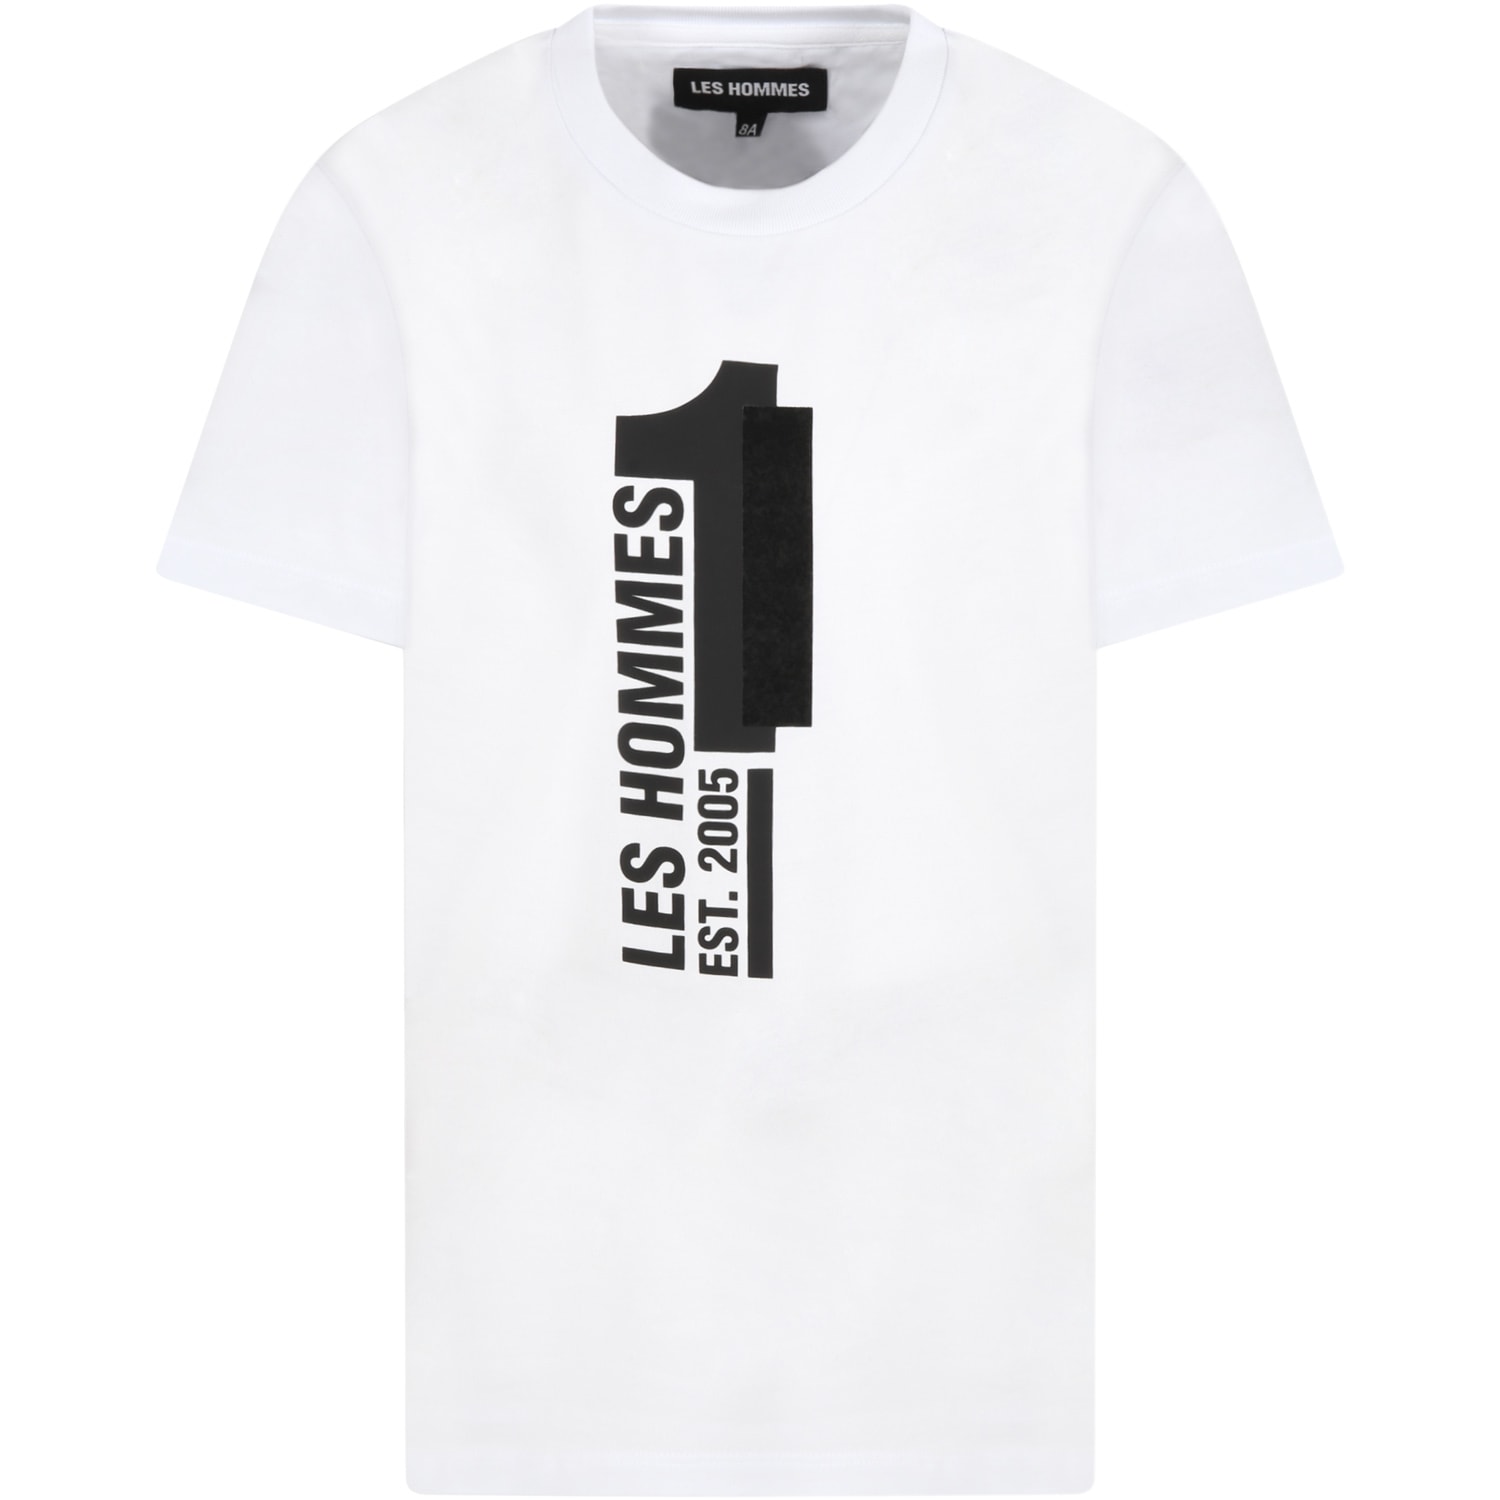 Les Hommes White T-shirt For Boy With Logo